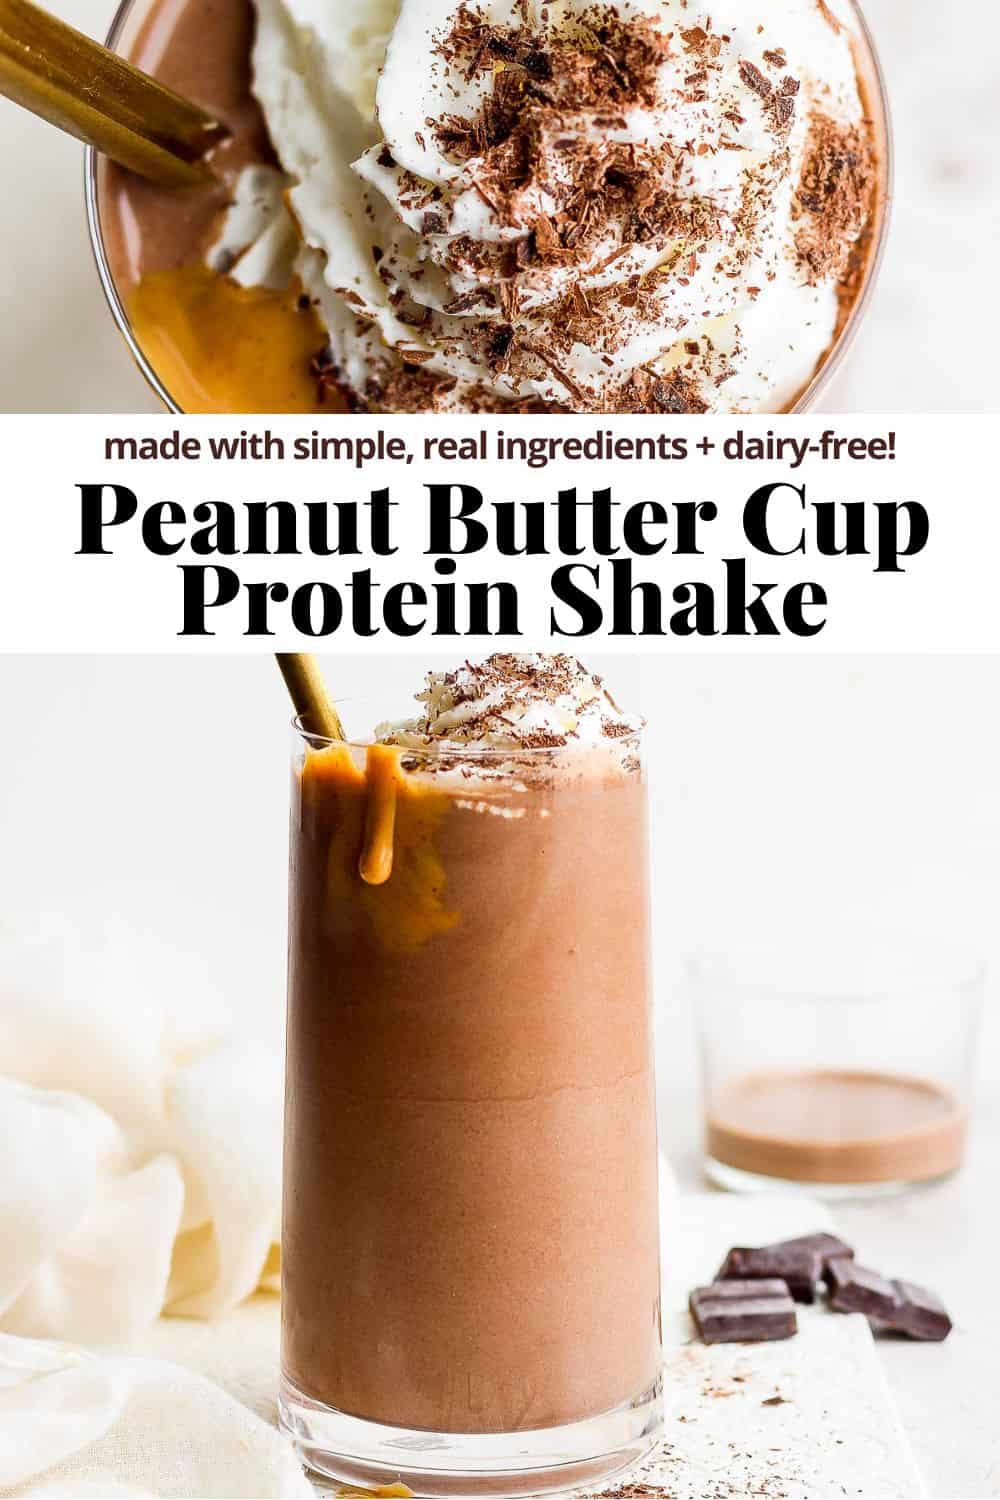 Pinterest image showing a chocolate protein shake with the recipe title.